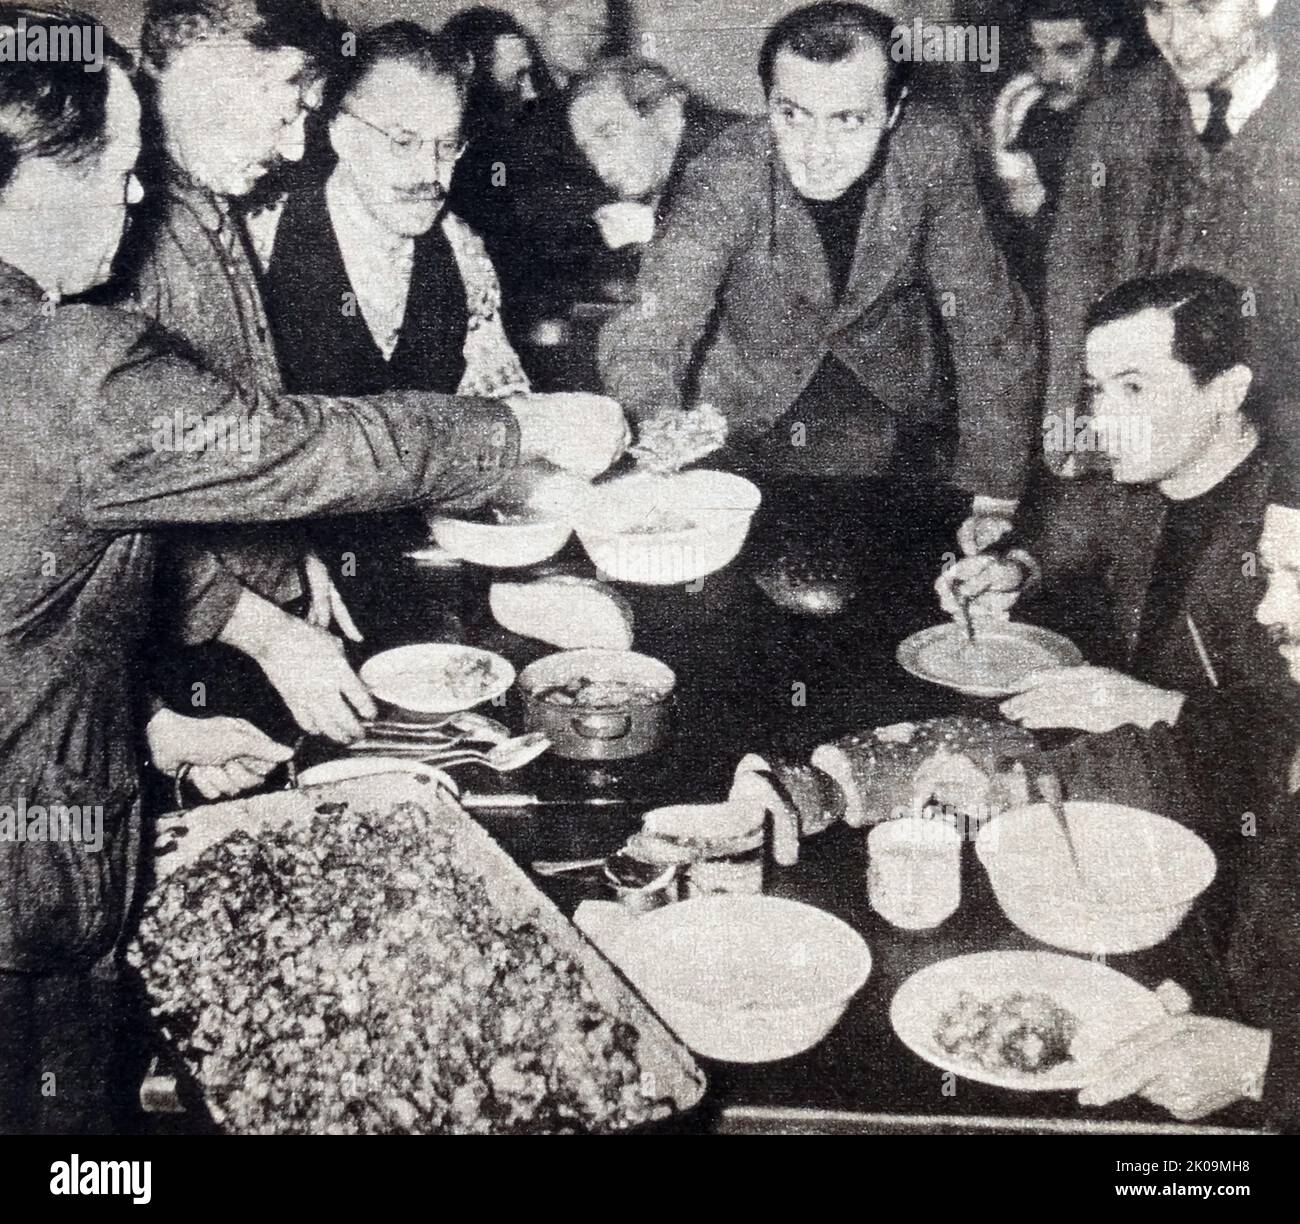 French prison orderly serves out hash for lunch at Wulzburg Castle, where the majority of prisoners are French and British, during World War II. Stock Photo